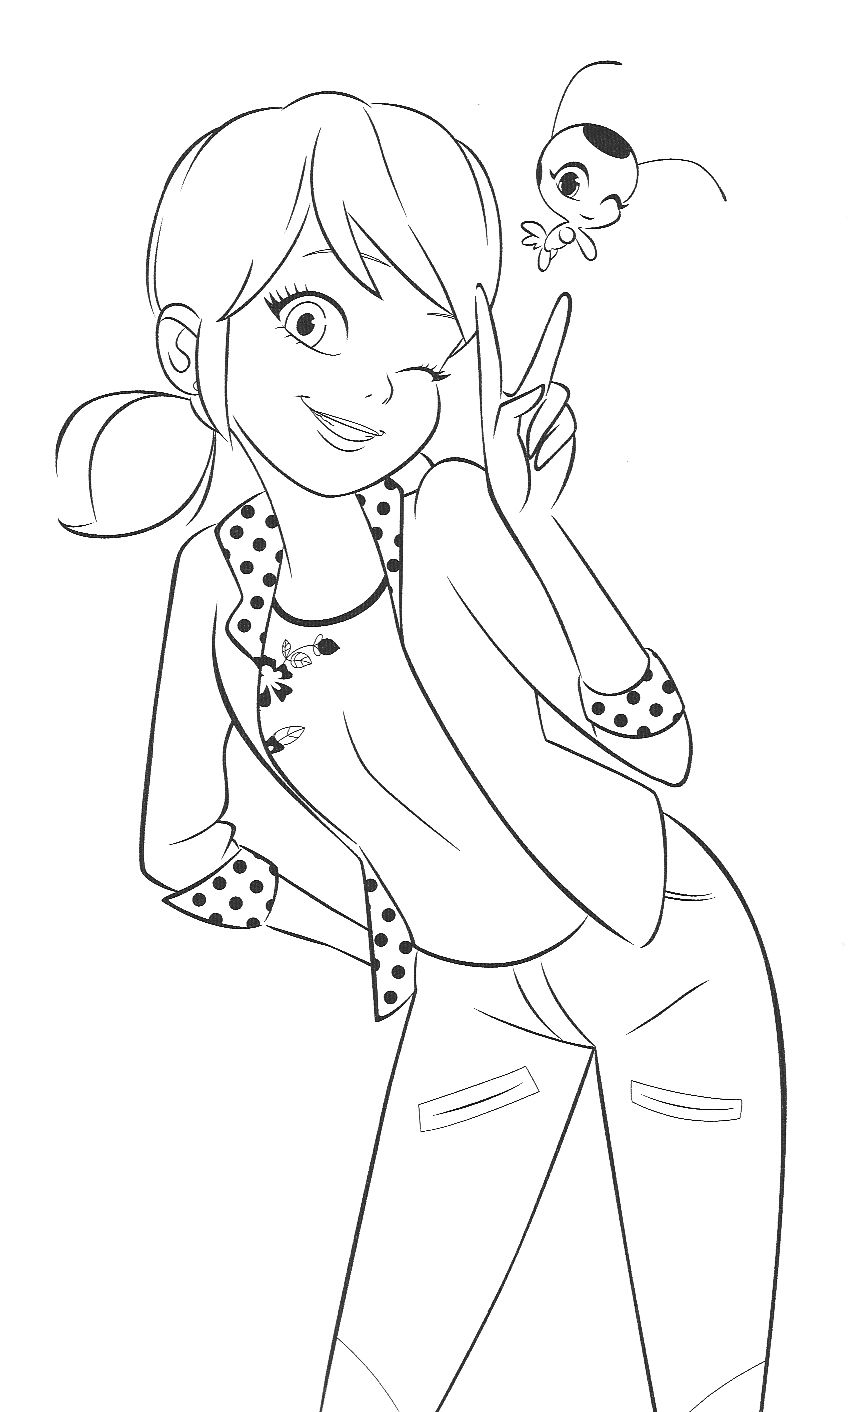 Miraculous Ladybug Marinette Coloring Pages Free | Ladybug Coloring destiné Miraculous Coloriage Pdf